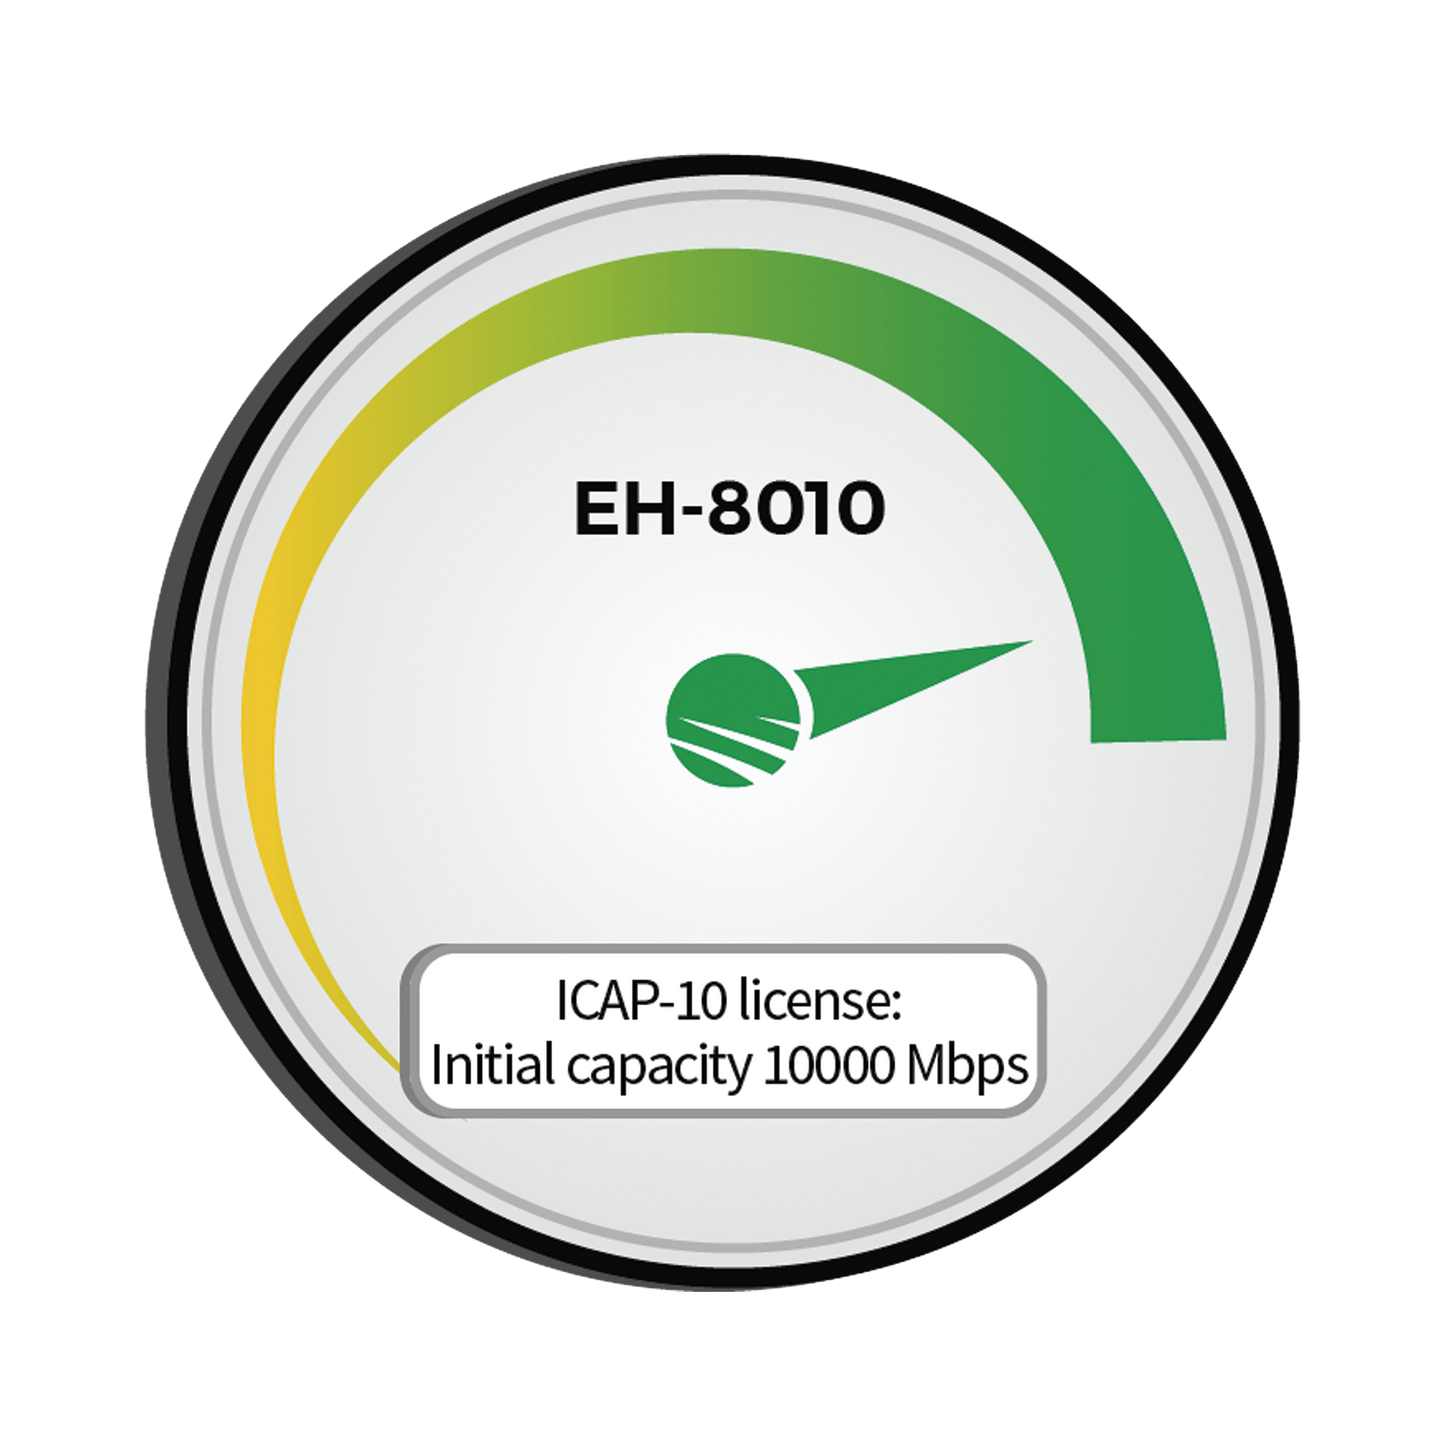 Initial capacity 10,000 Mbps (10Gbps)